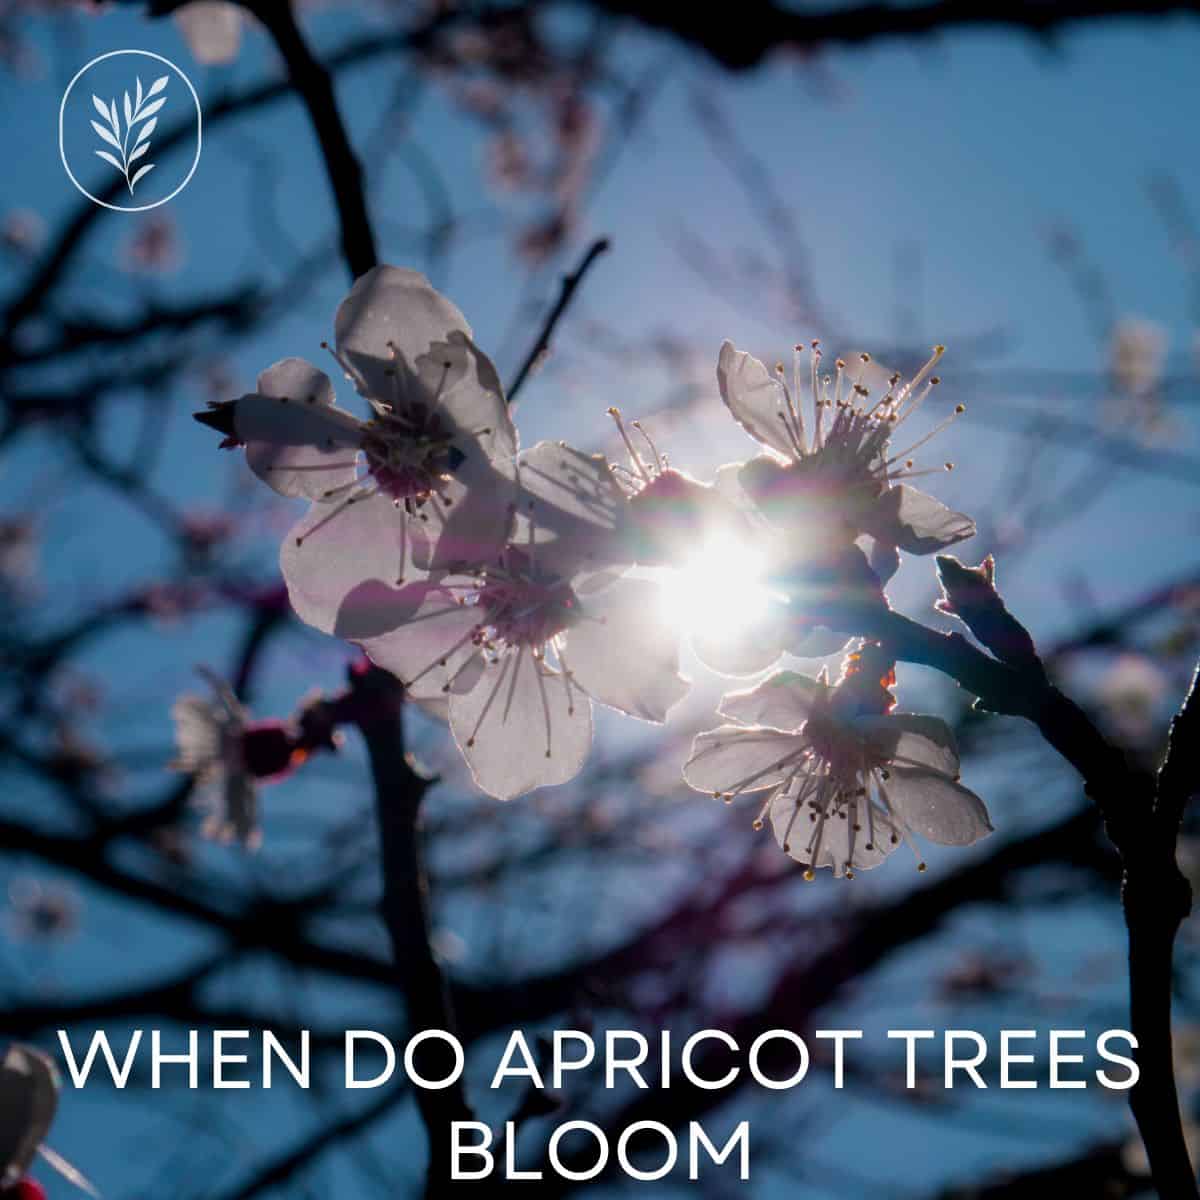 When do apricot trees bloom via @home4theharvest